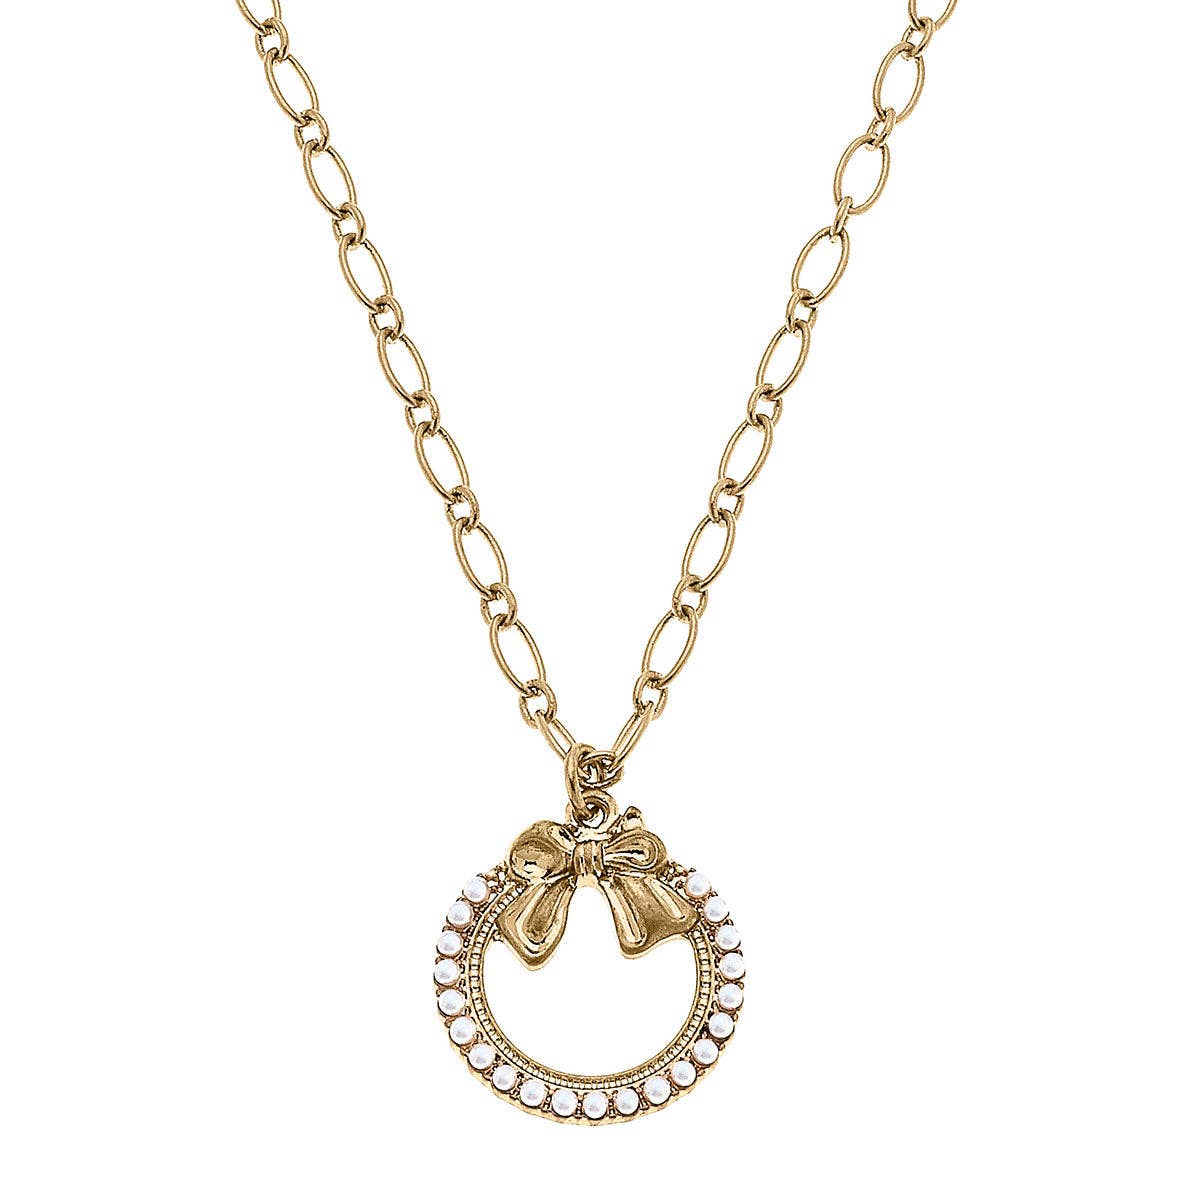 Rowen Pearl Bow Wreath Pendant Necklace in Worn Gold